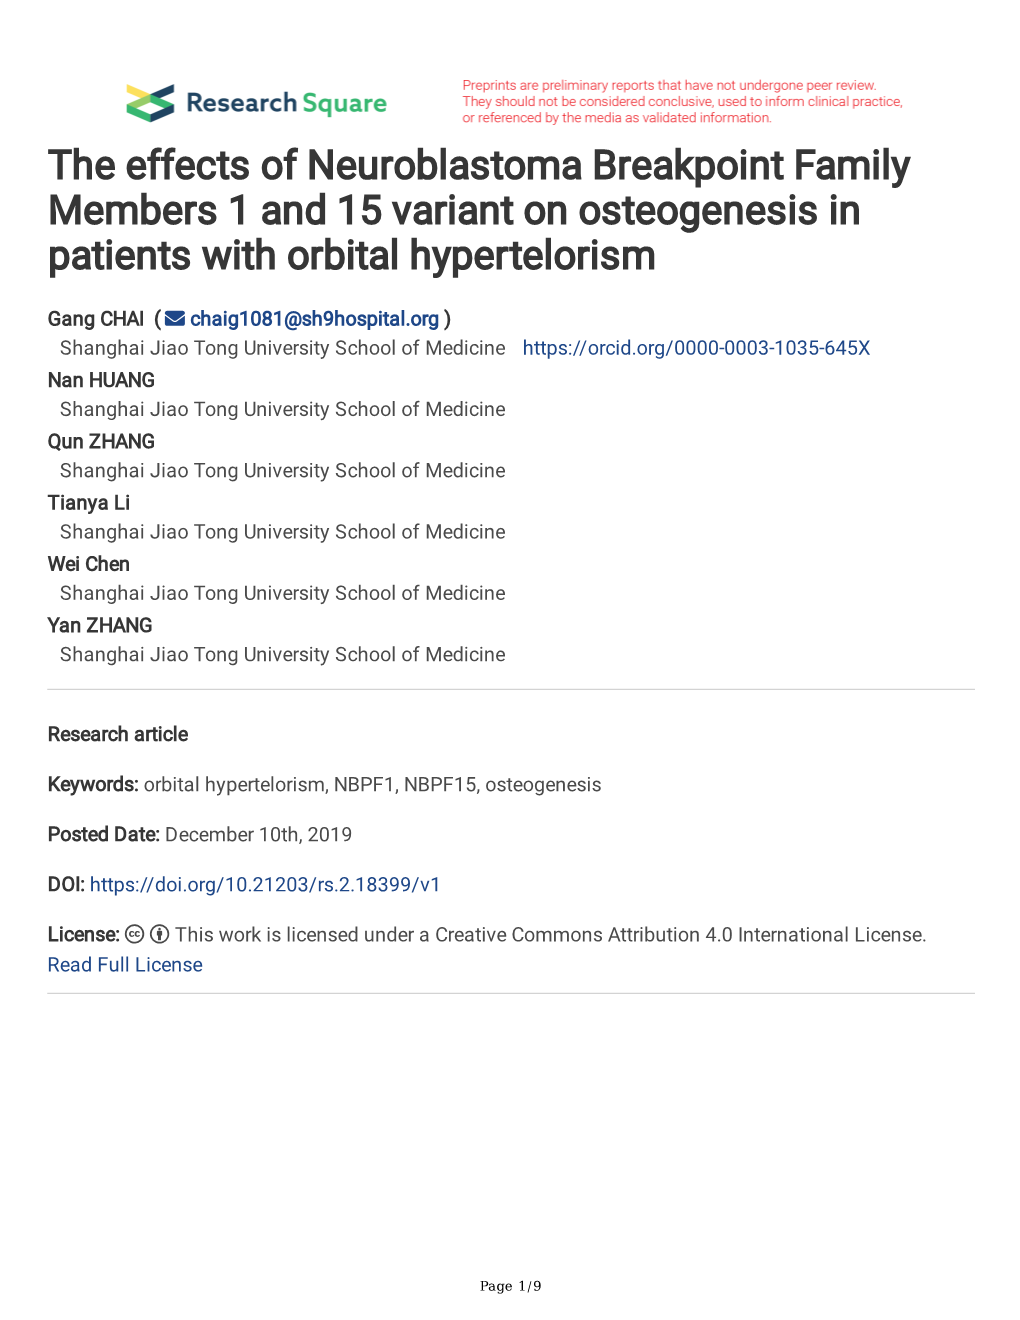 The Effects of Neuroblastoma Breakpoint Family Members 1 and 15 Variant on Osteogenesis in Patients with Orbital Hypertelorism